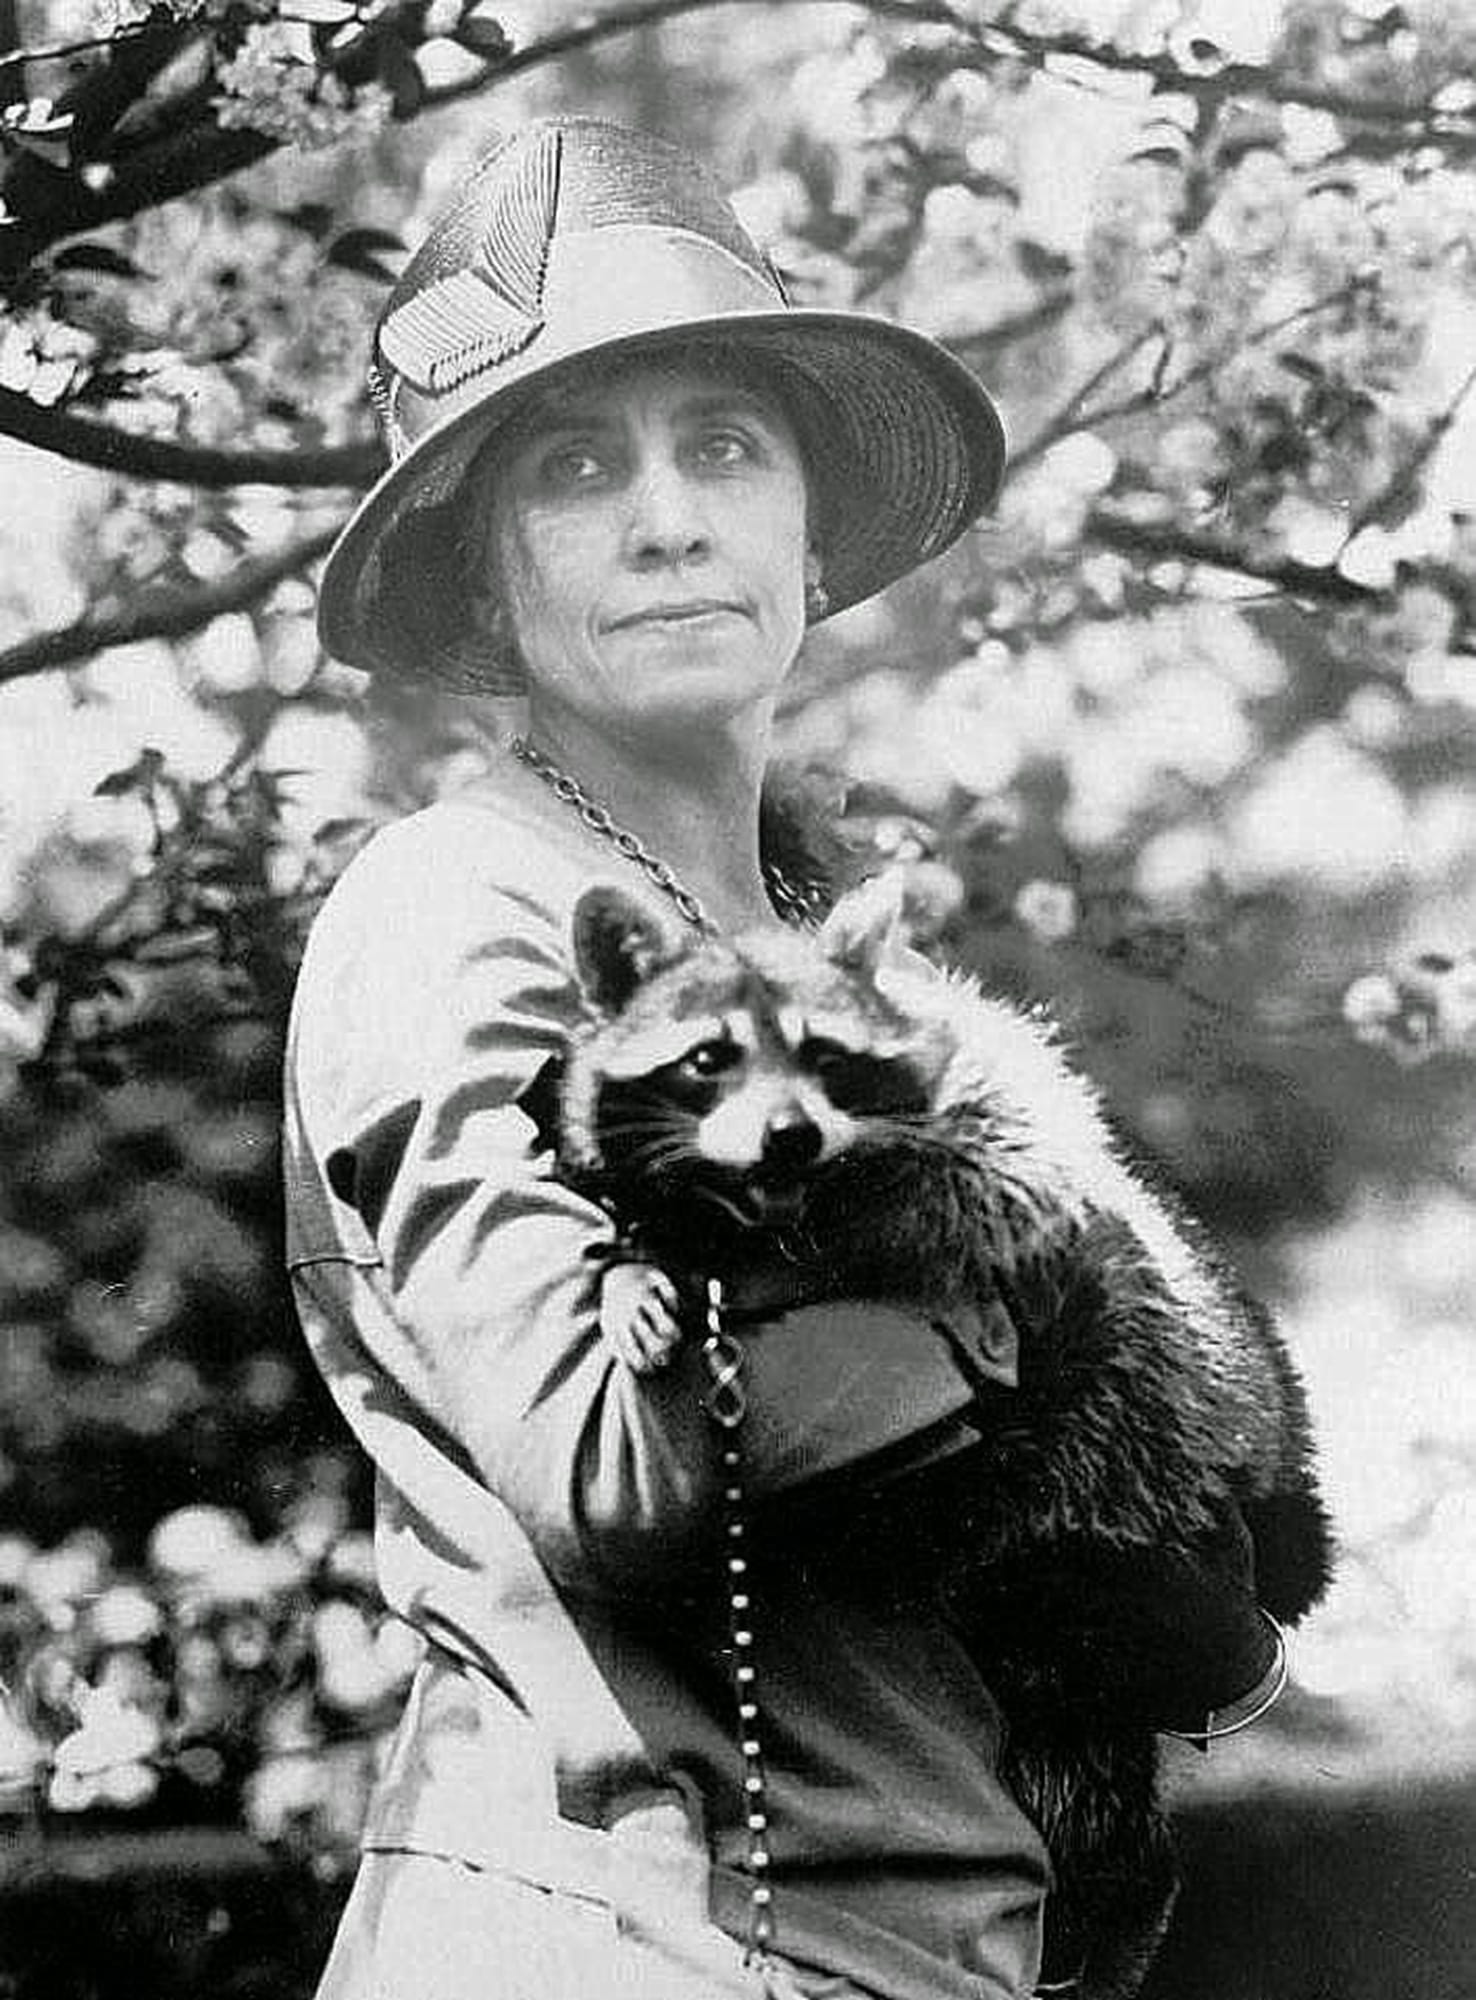 Library of Congress Prints and Photographs Division
First lady Grace Coolidge took her pet raccoon, Rebecca, for walks on the White House grounds in the 1920s.